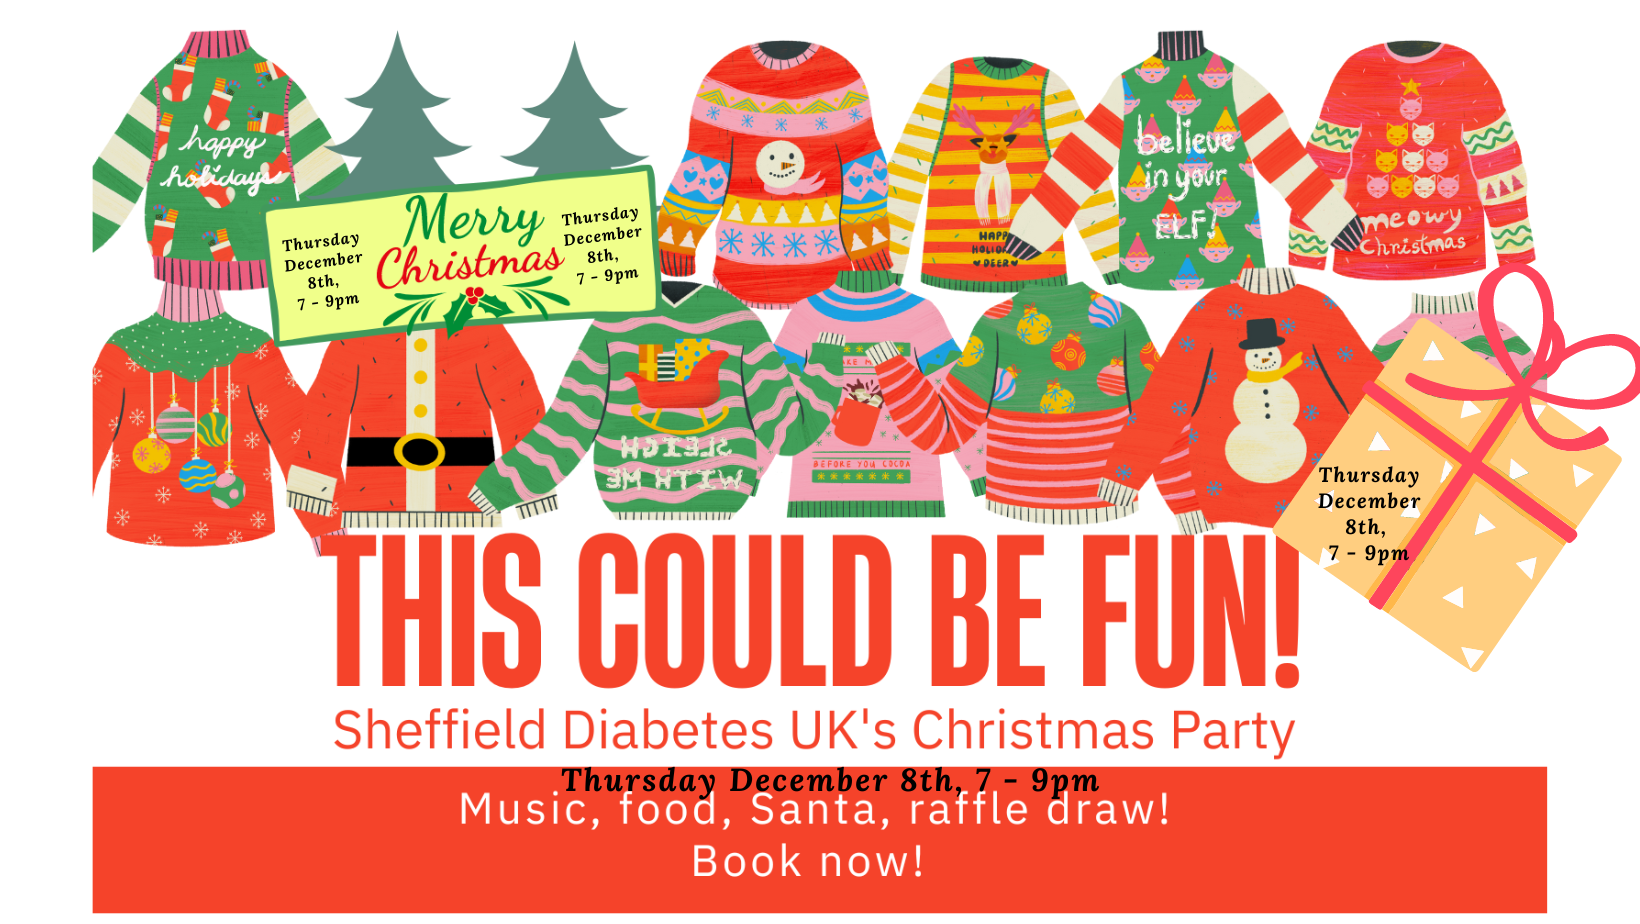 Image name Thursday December 8th 7 9pm1 the 15 image from the post Sheffield Diabetes UK festive social in Yorkshire.com.